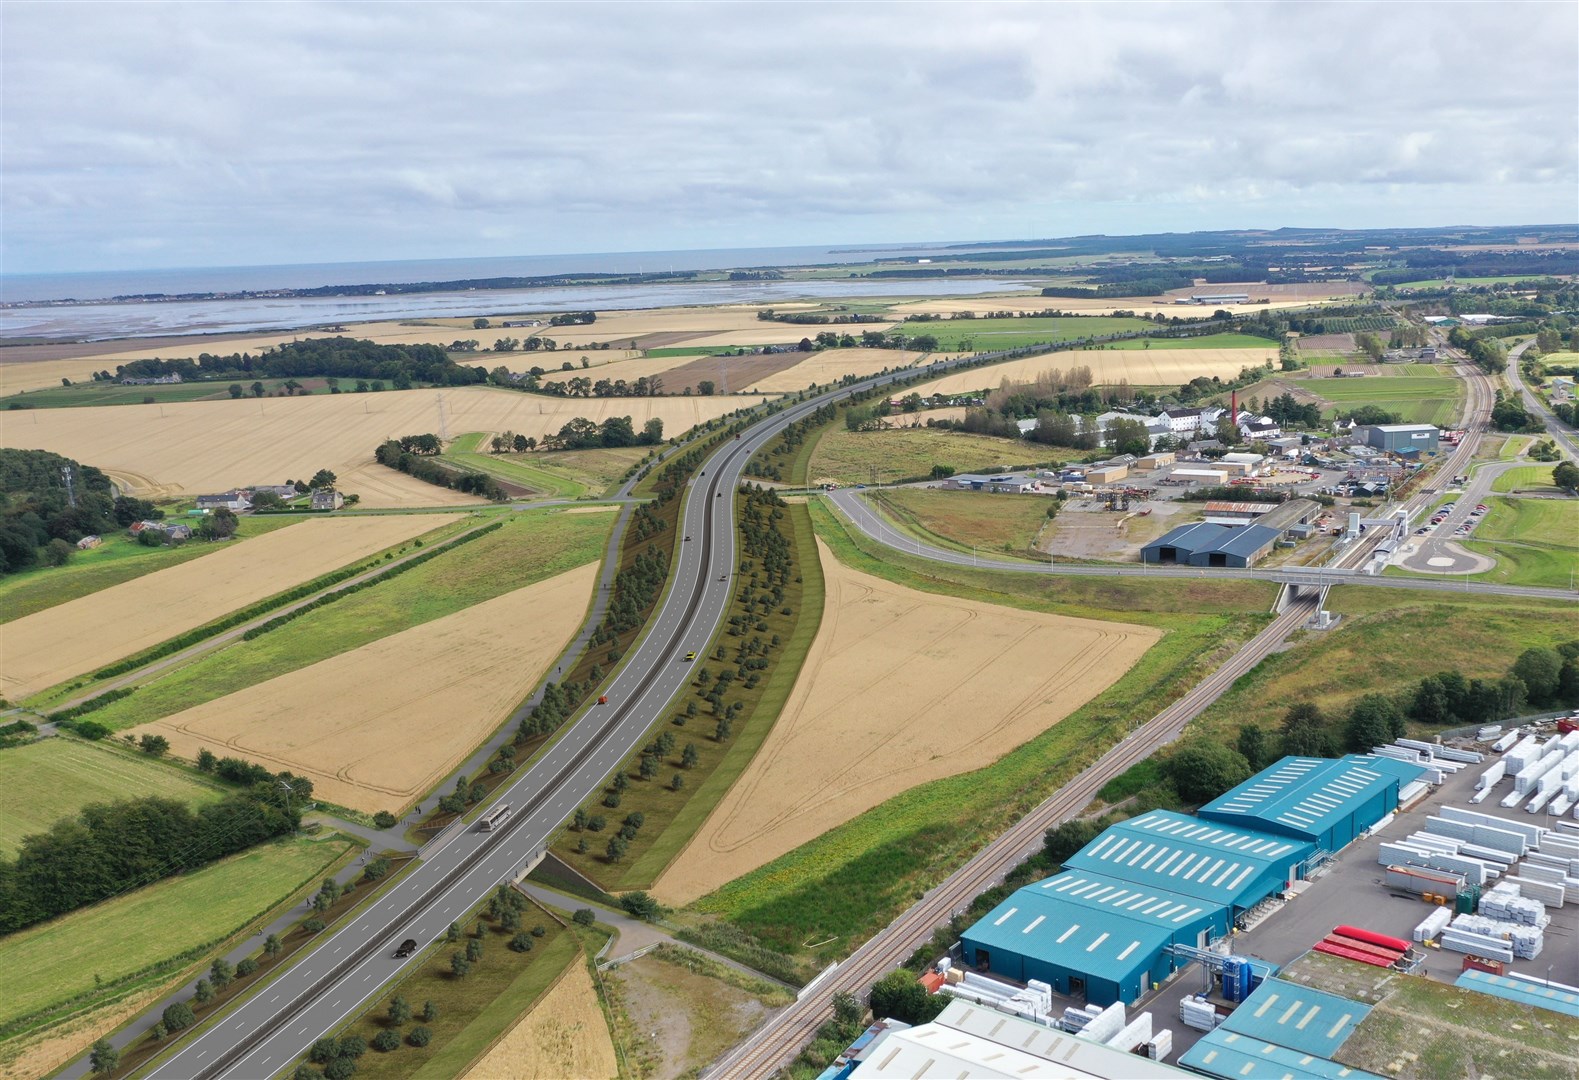 An aerial view of proposed A96 dual carriageway at Forres looking north-east.